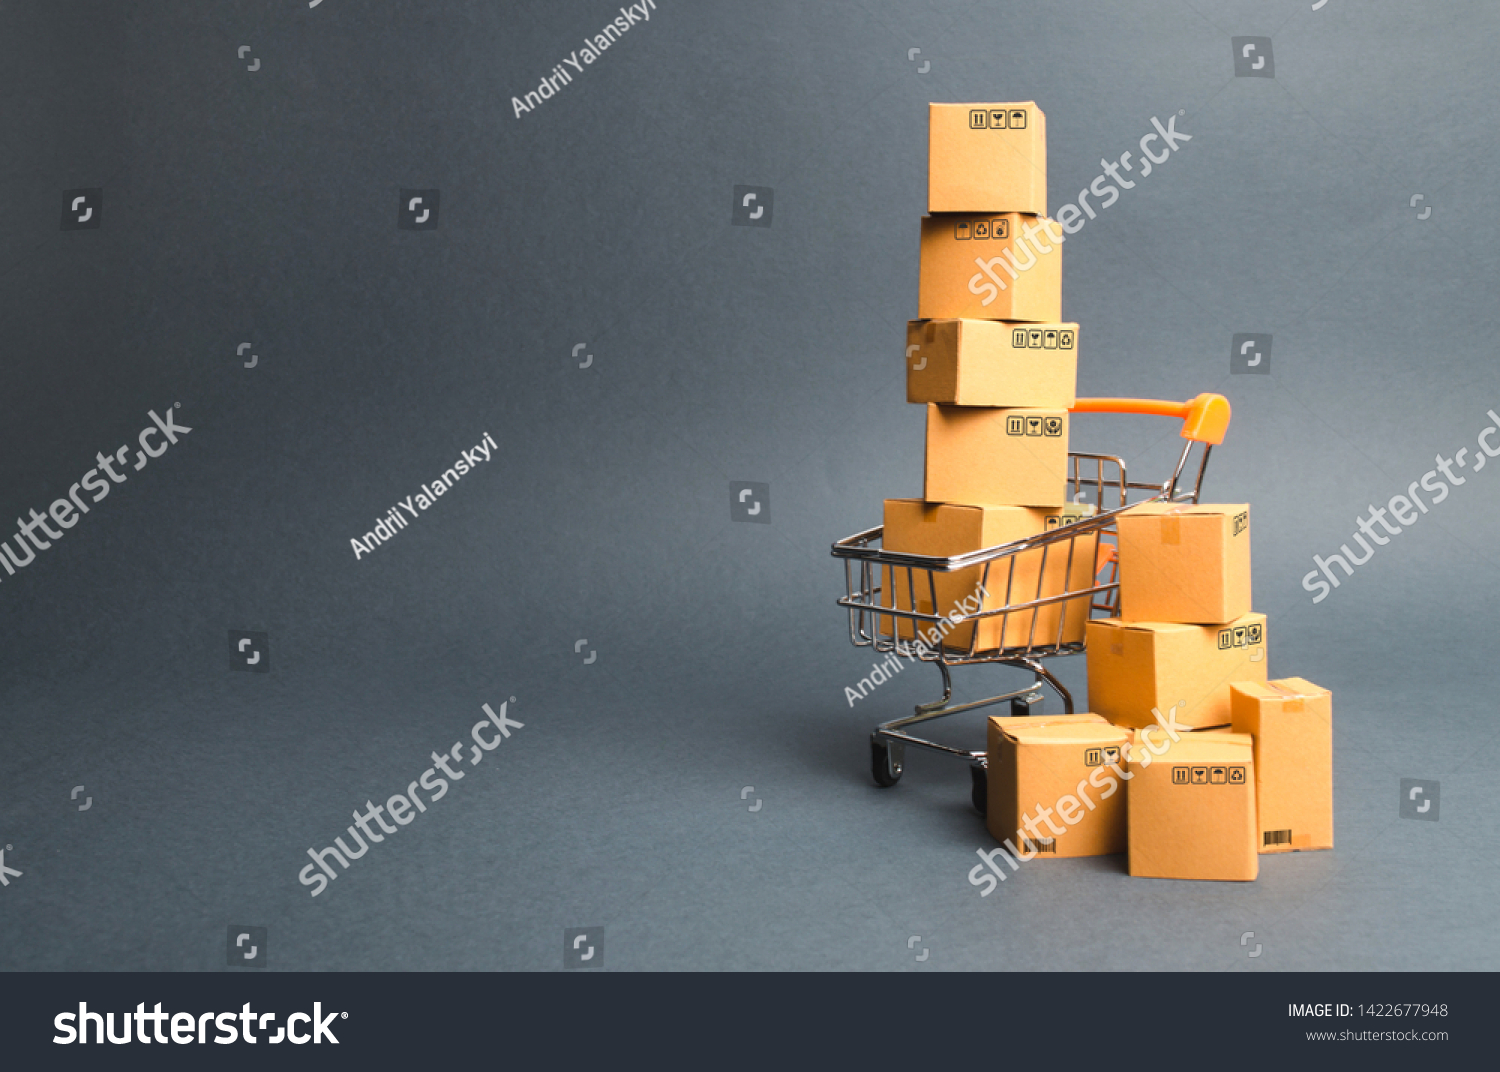 Shopping cart supermarket with boxes. Sales of products. The concept commerce, online shopping. Purchasing power, delivery order. E-commerce, sales and sale of goods through online trading platforms. #1422677948